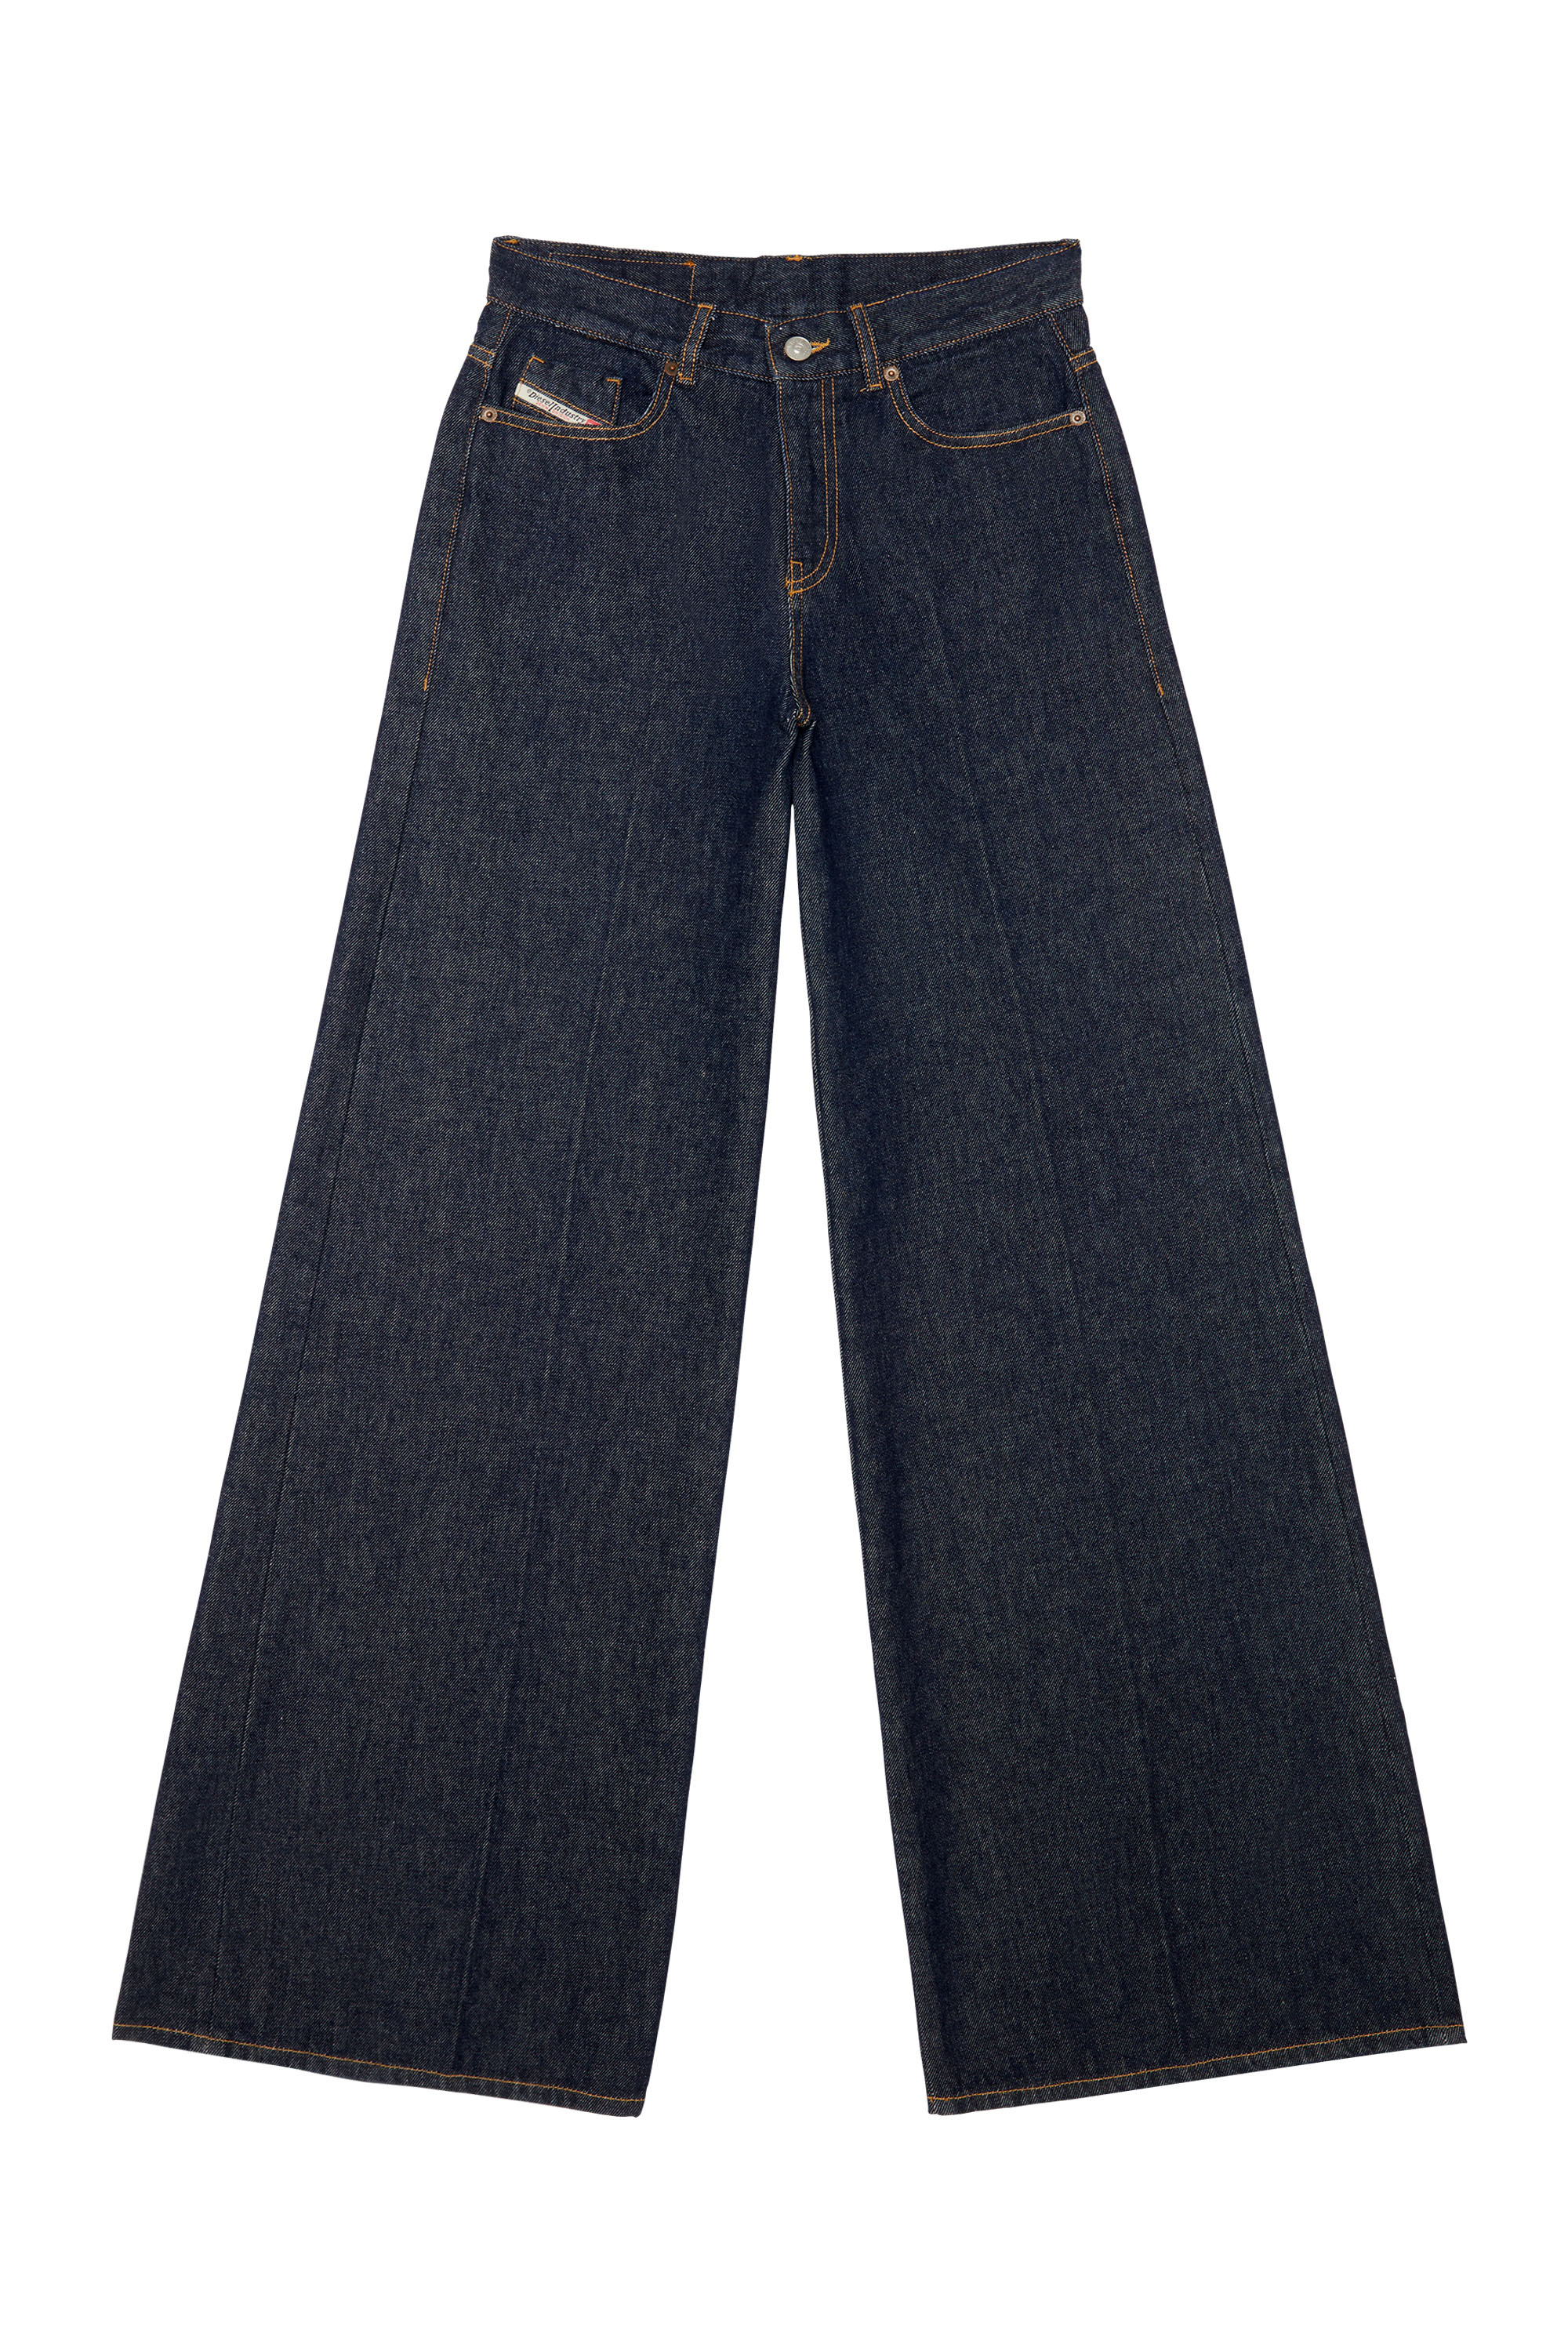 1978 D-AKEMI Z9C02 Bootcut and Flare Jeans, Dark Blue - Jeans